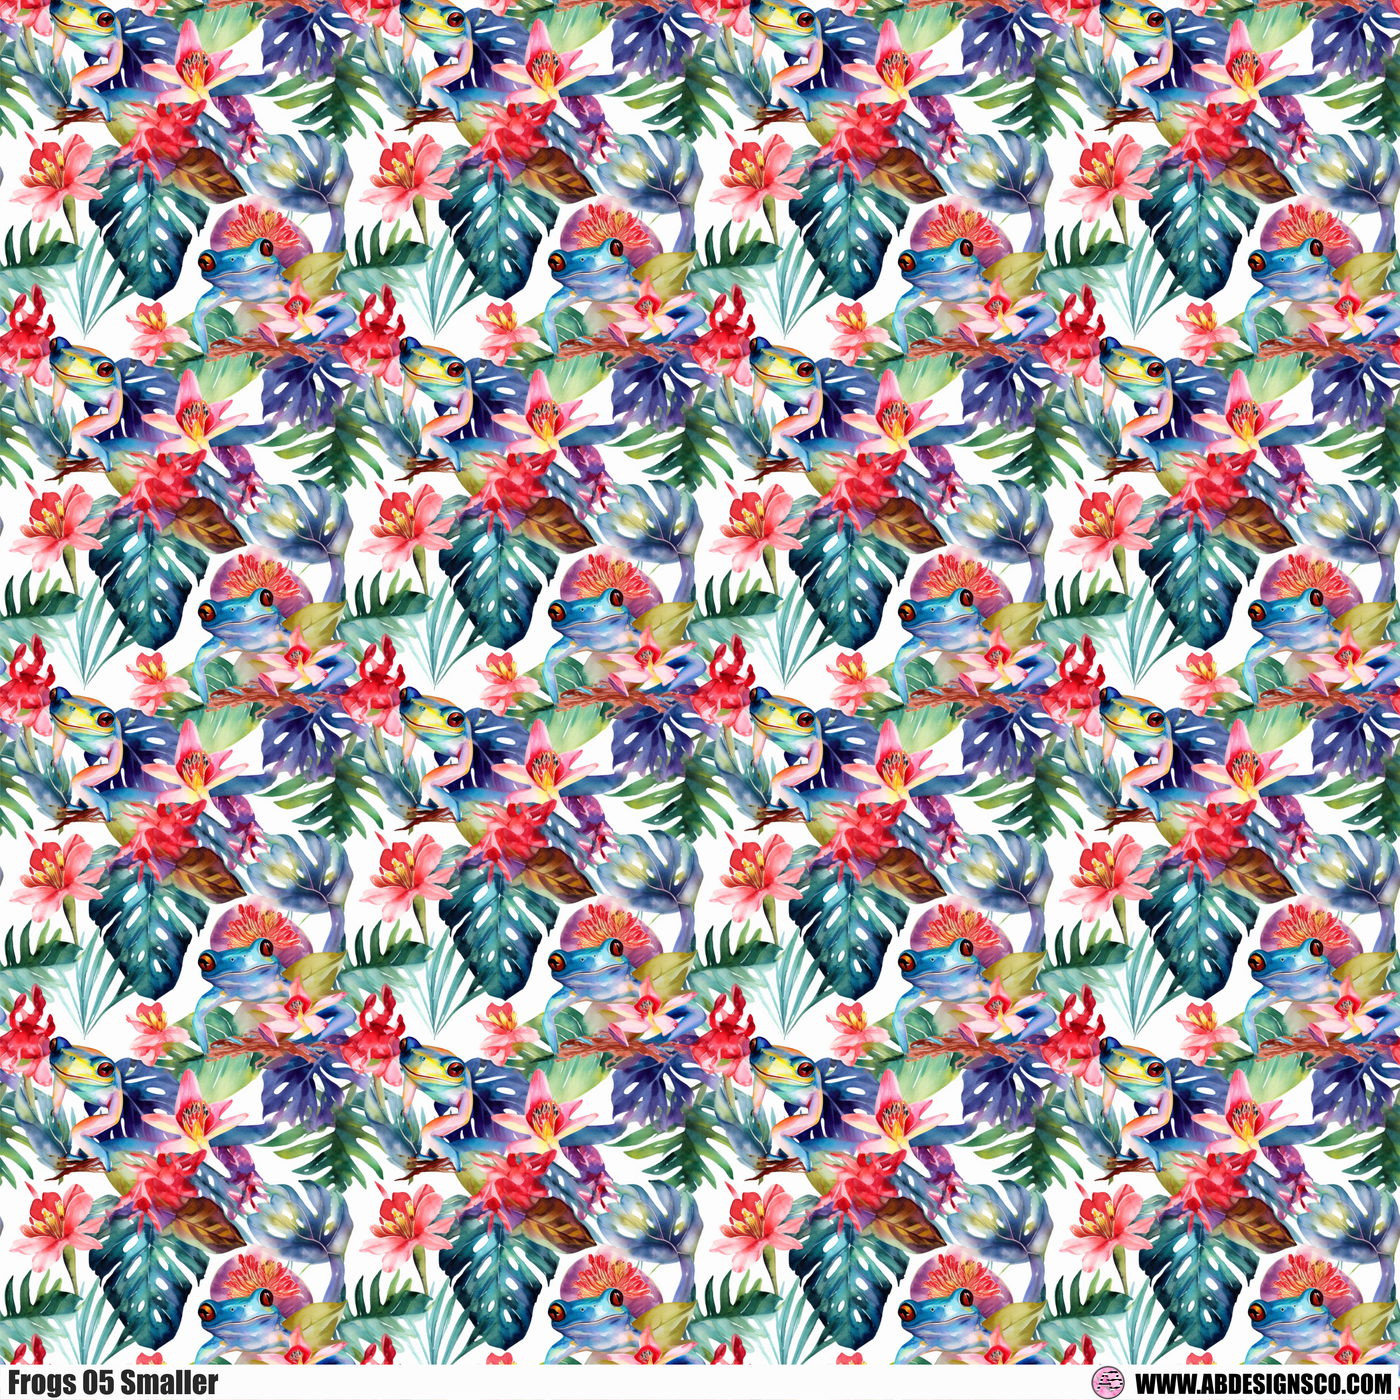 Adhesive Patterned Vinyl - Frog 05 Smaller